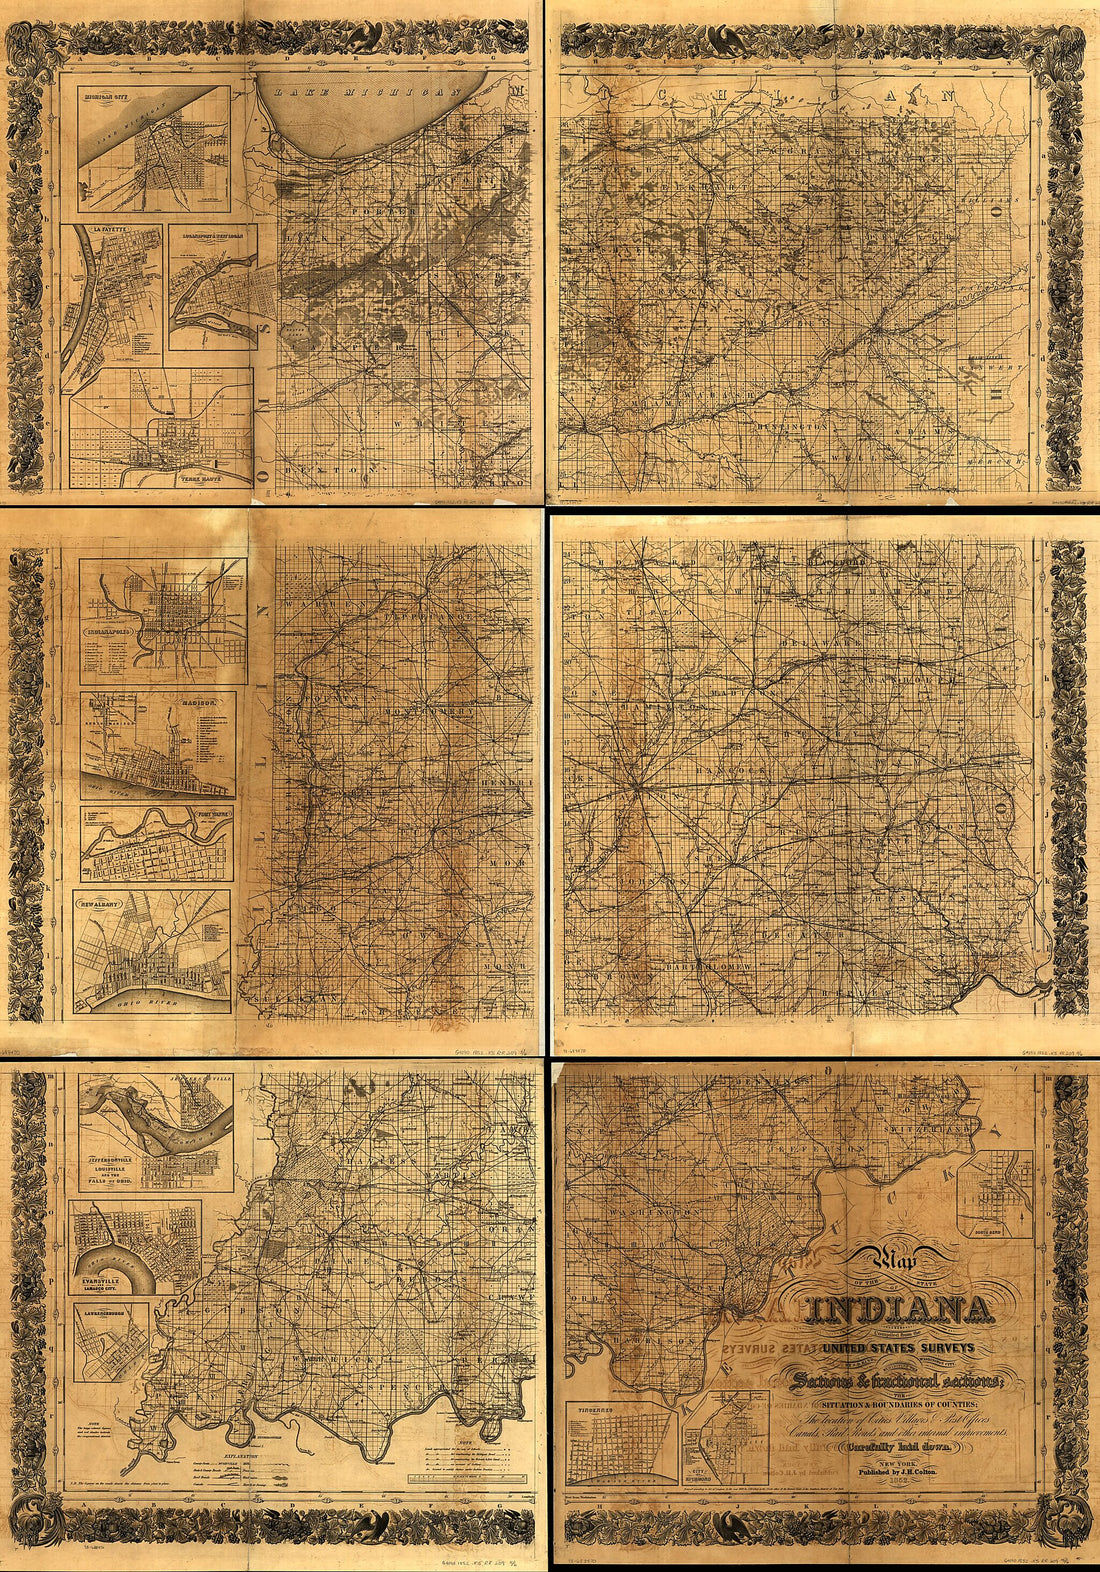 This old map of Map of the State of Indiana Compiled from the United States Surveys by S. D. King, Washington City; Exhibiting the Sections &amp; Fractional Sections; the Situation &amp; Boundaries of Counties; the Location of Cities Villages &amp; Post Offices Cana